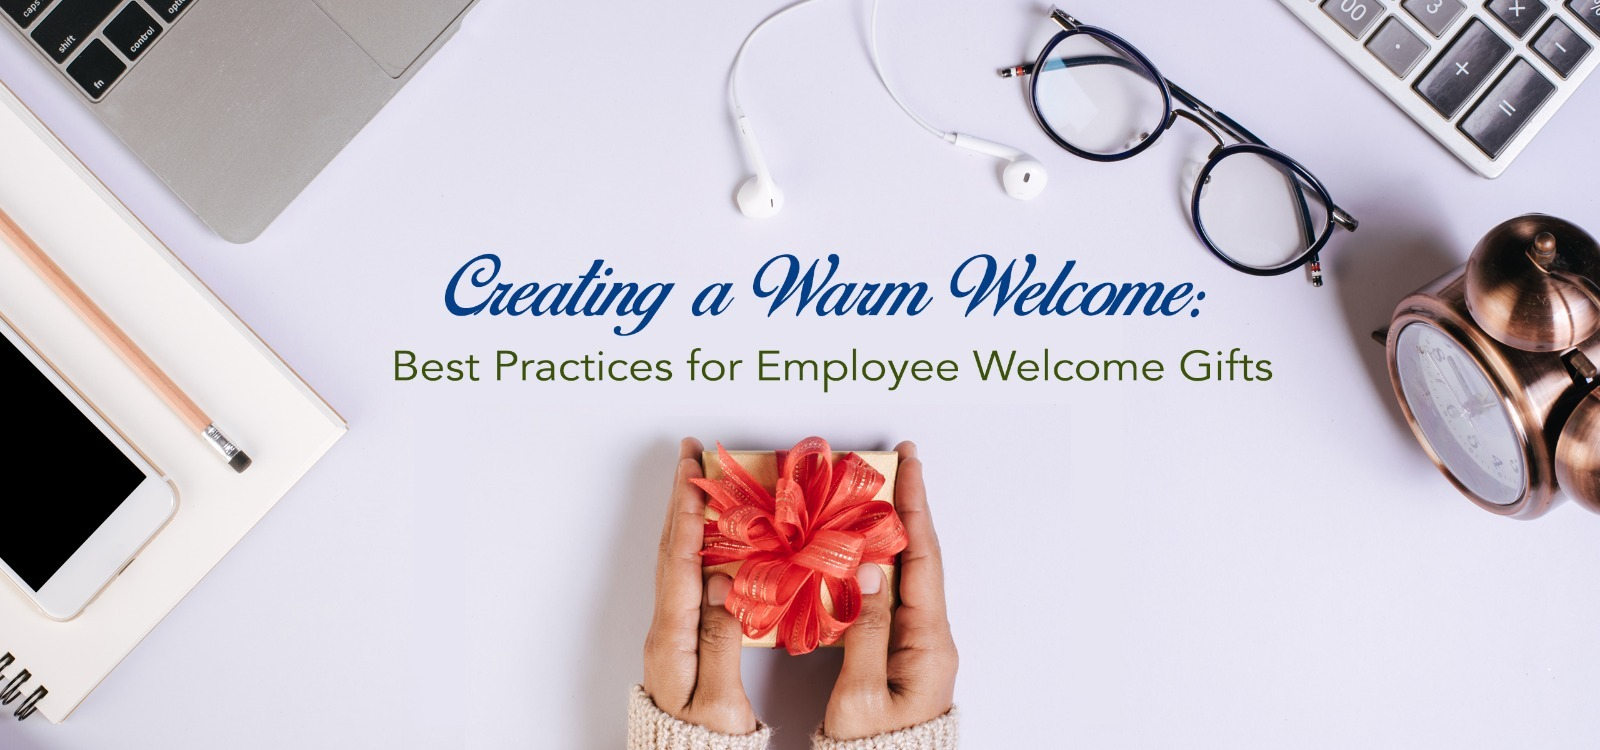 Best Practices for Employee Welcome Gifts